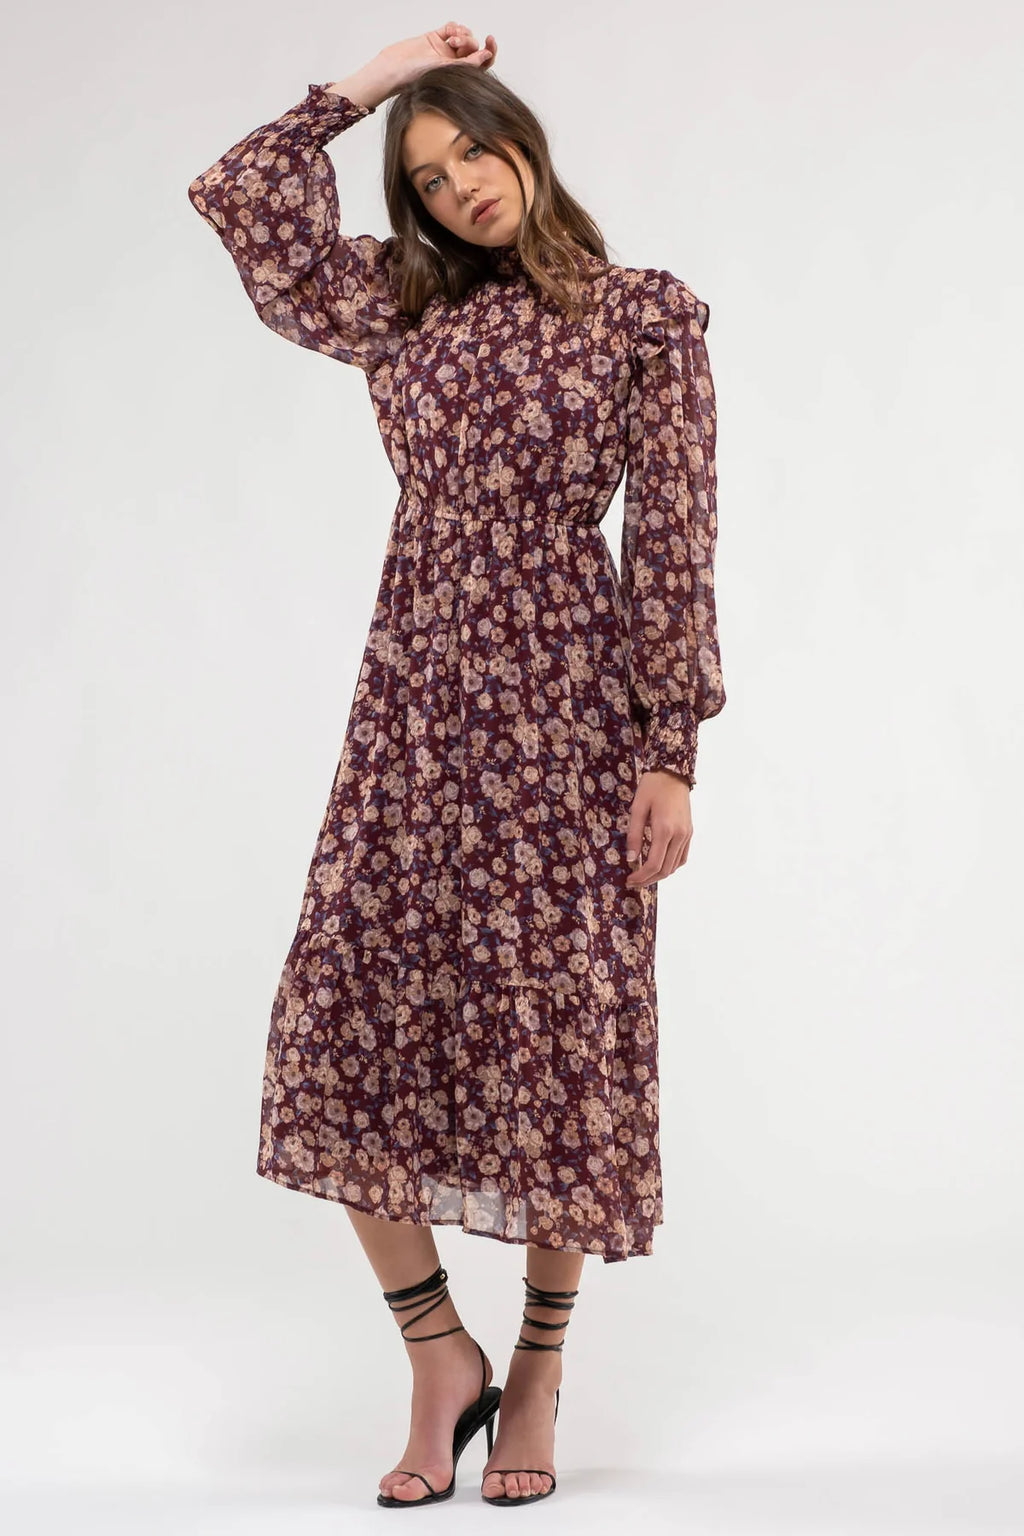 By The River by Blu Pepper Floral Midi Dress with Long Sleeves and Mock Neck